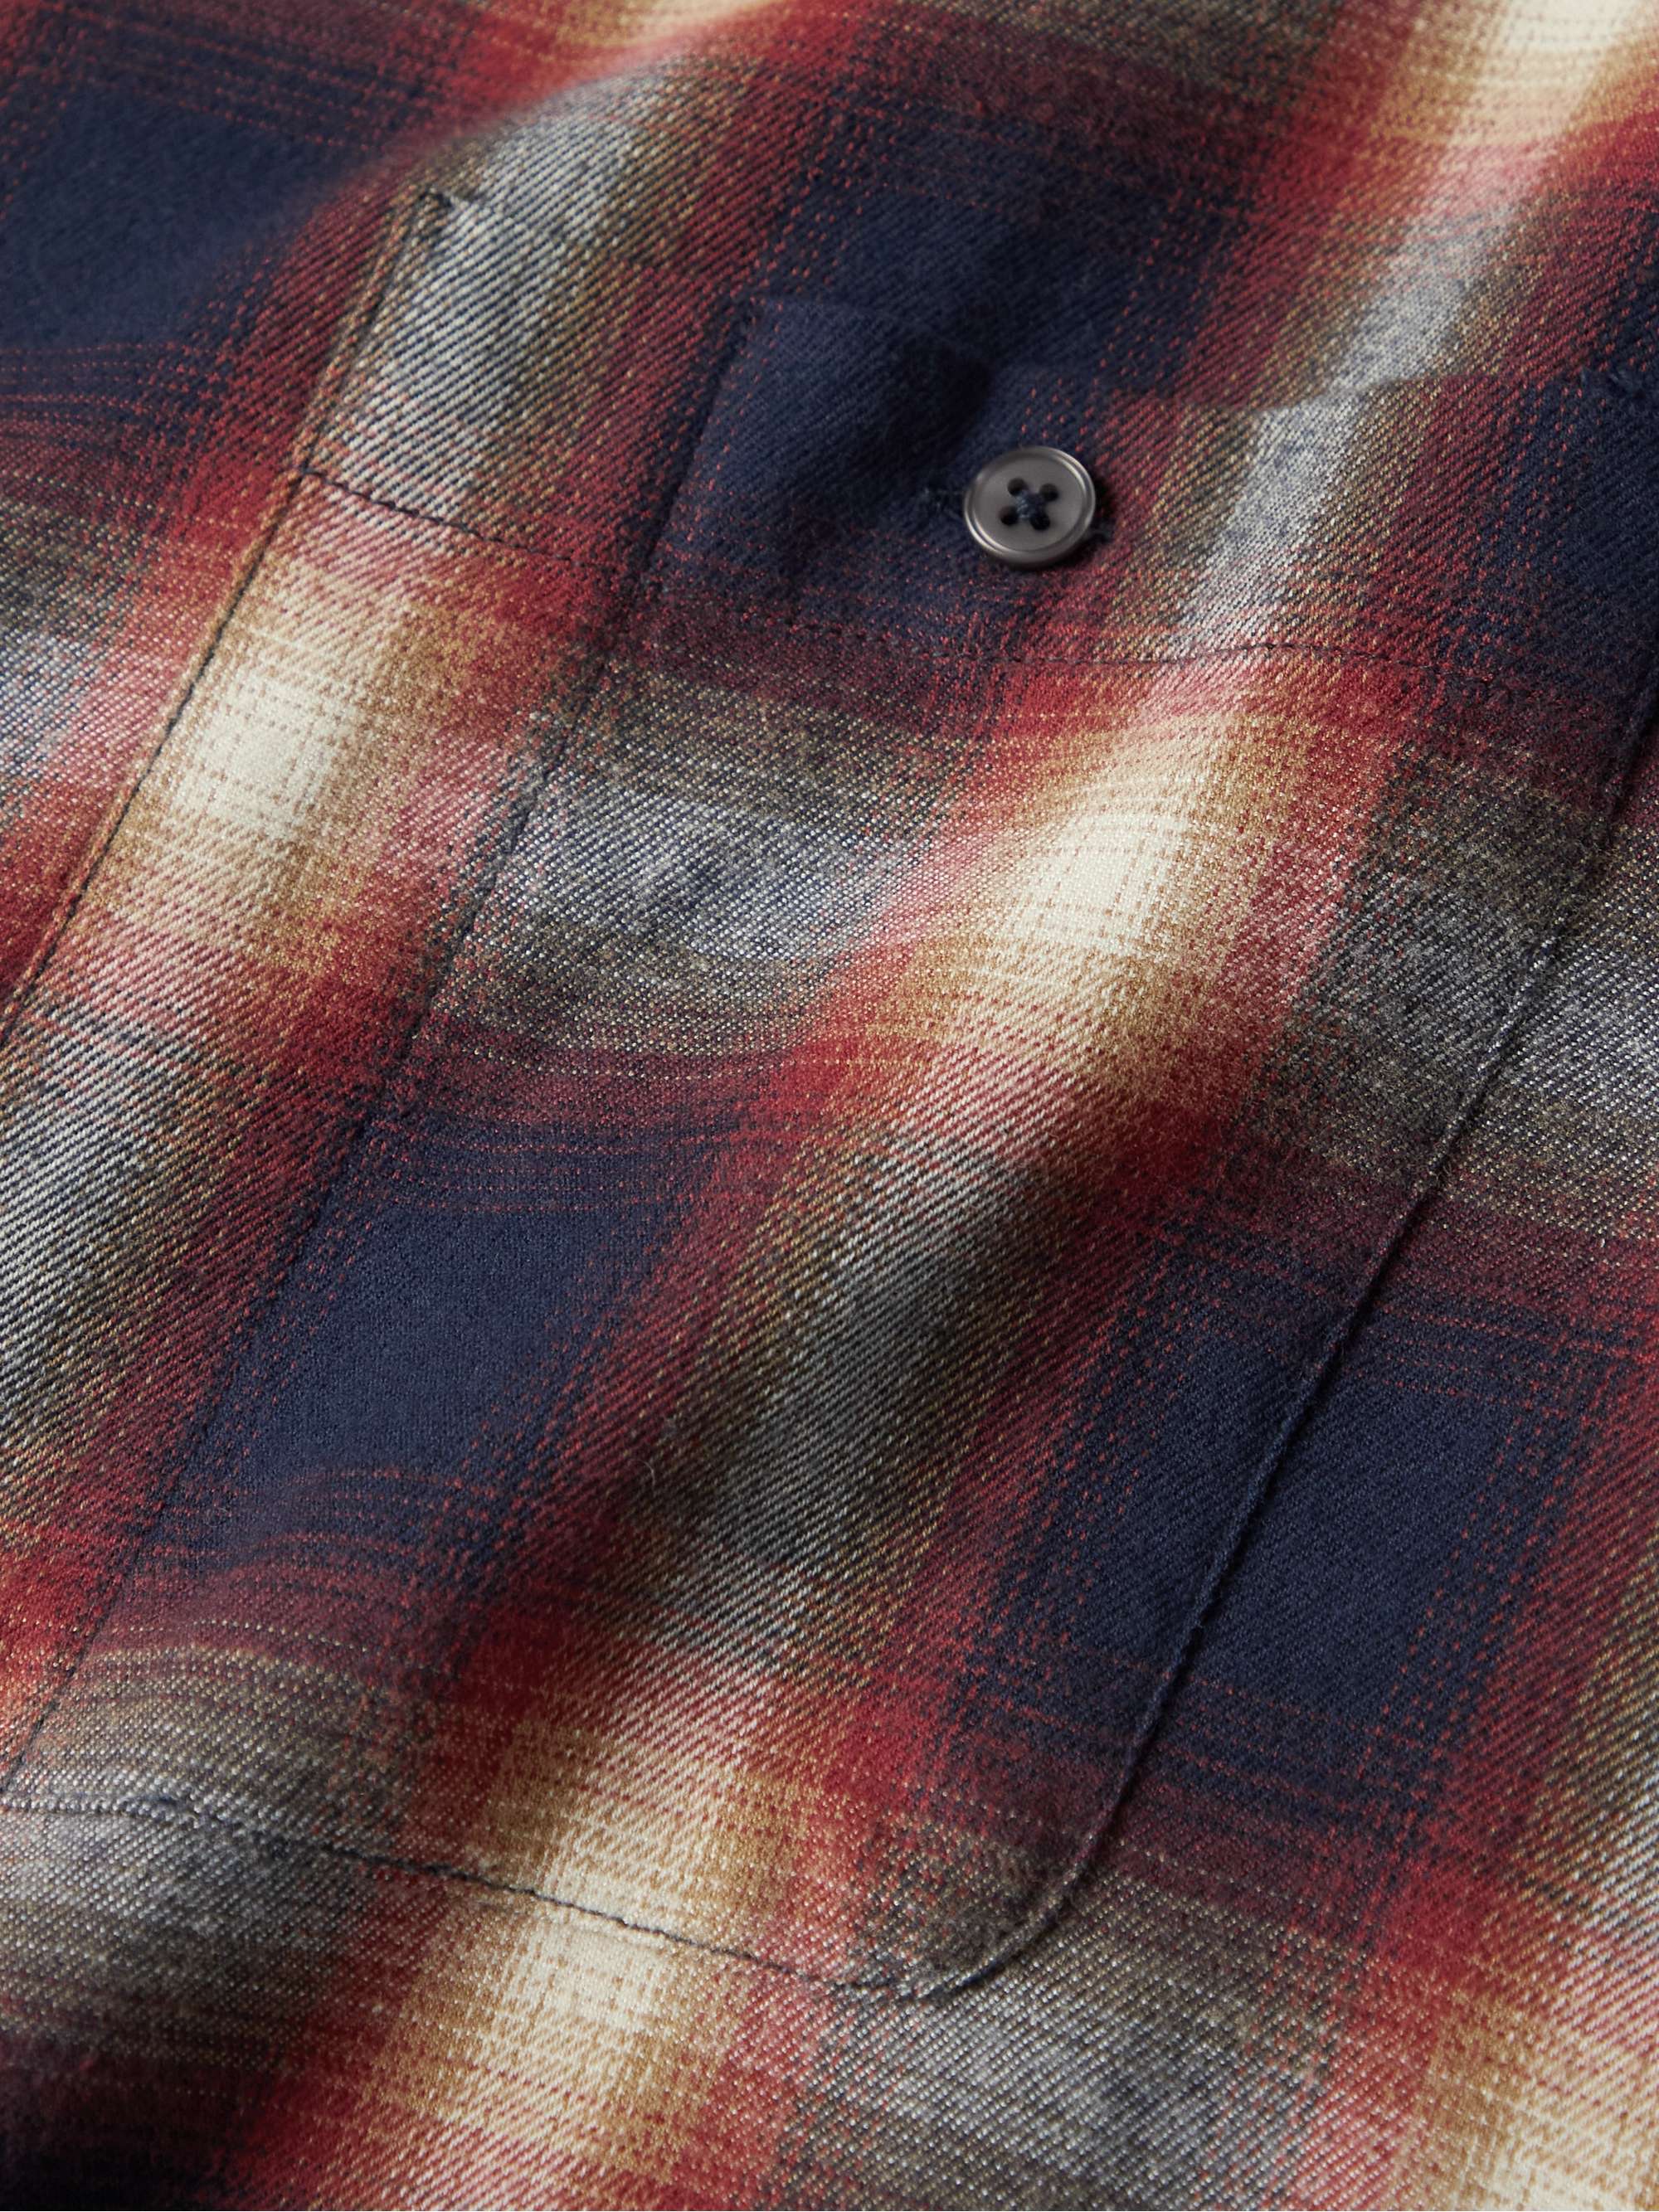 ALTEA Checked Cotton and Ramie-Blend Flannel Shirt